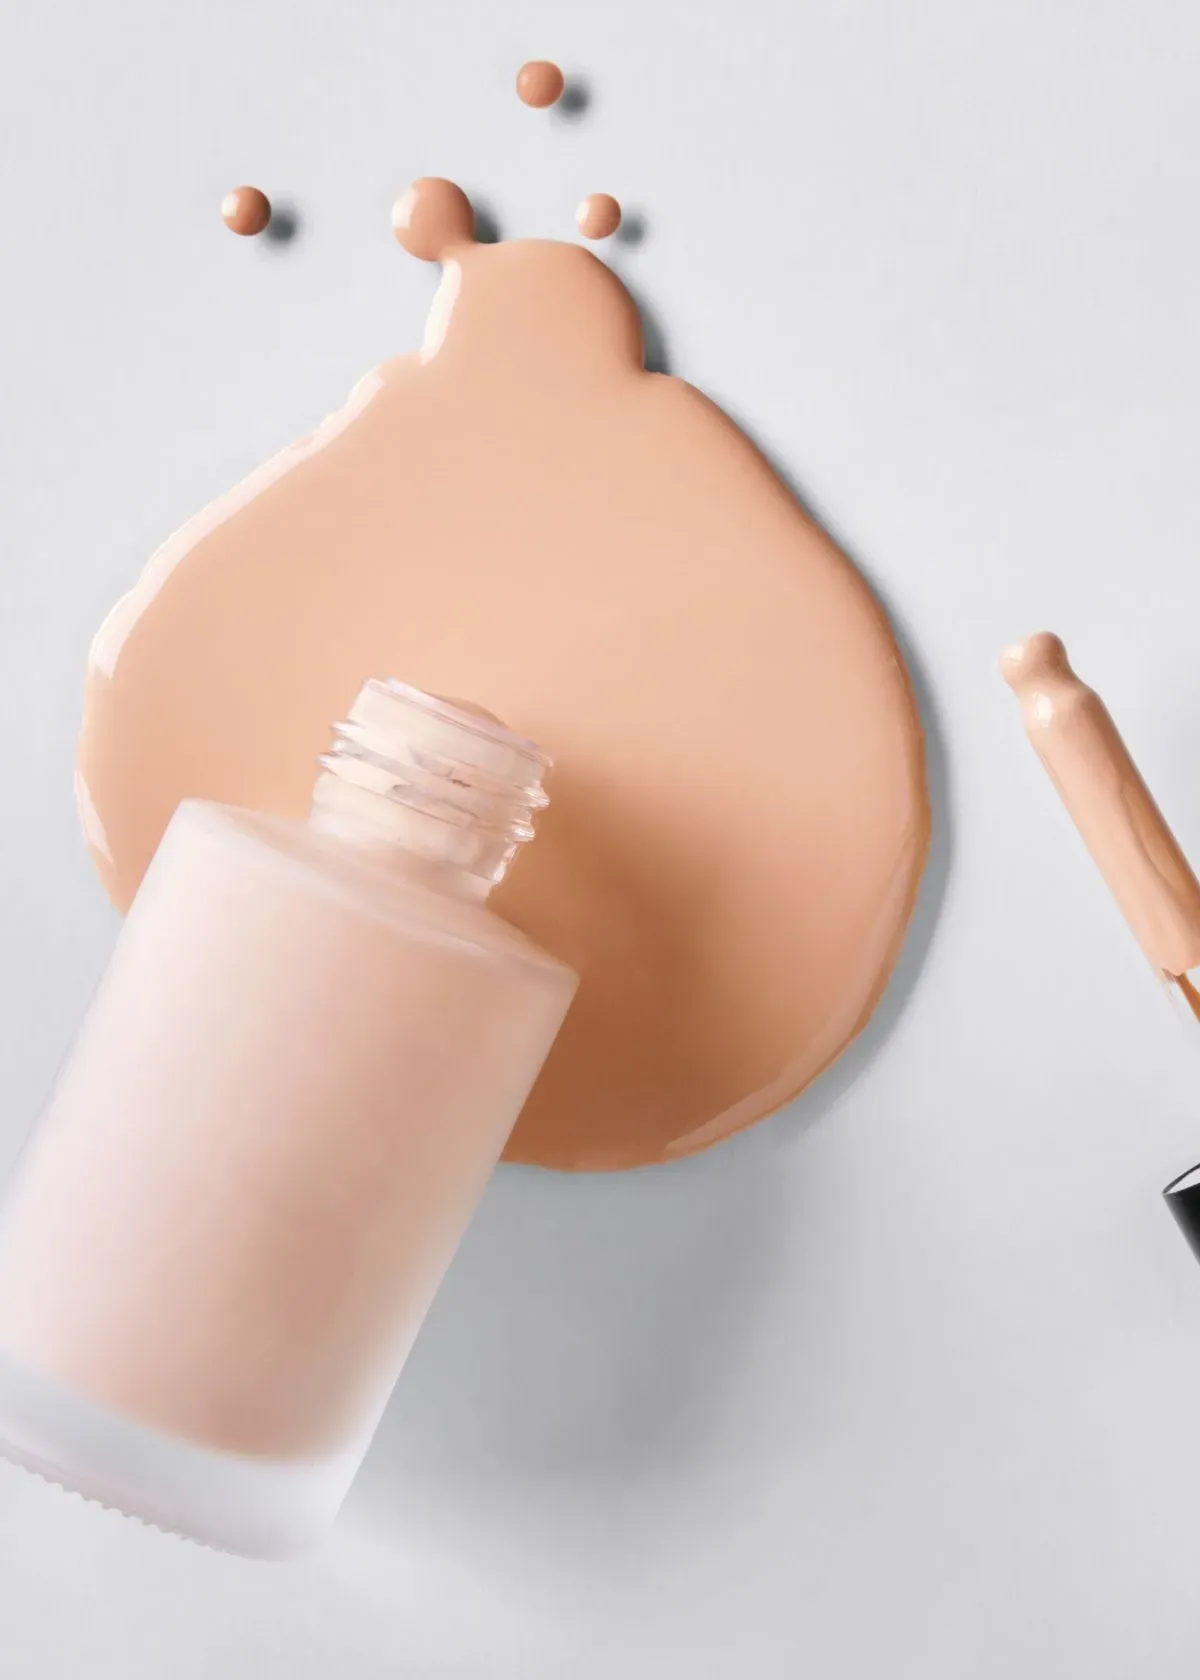 Is Water Based Foundation Good for Oily Skin?